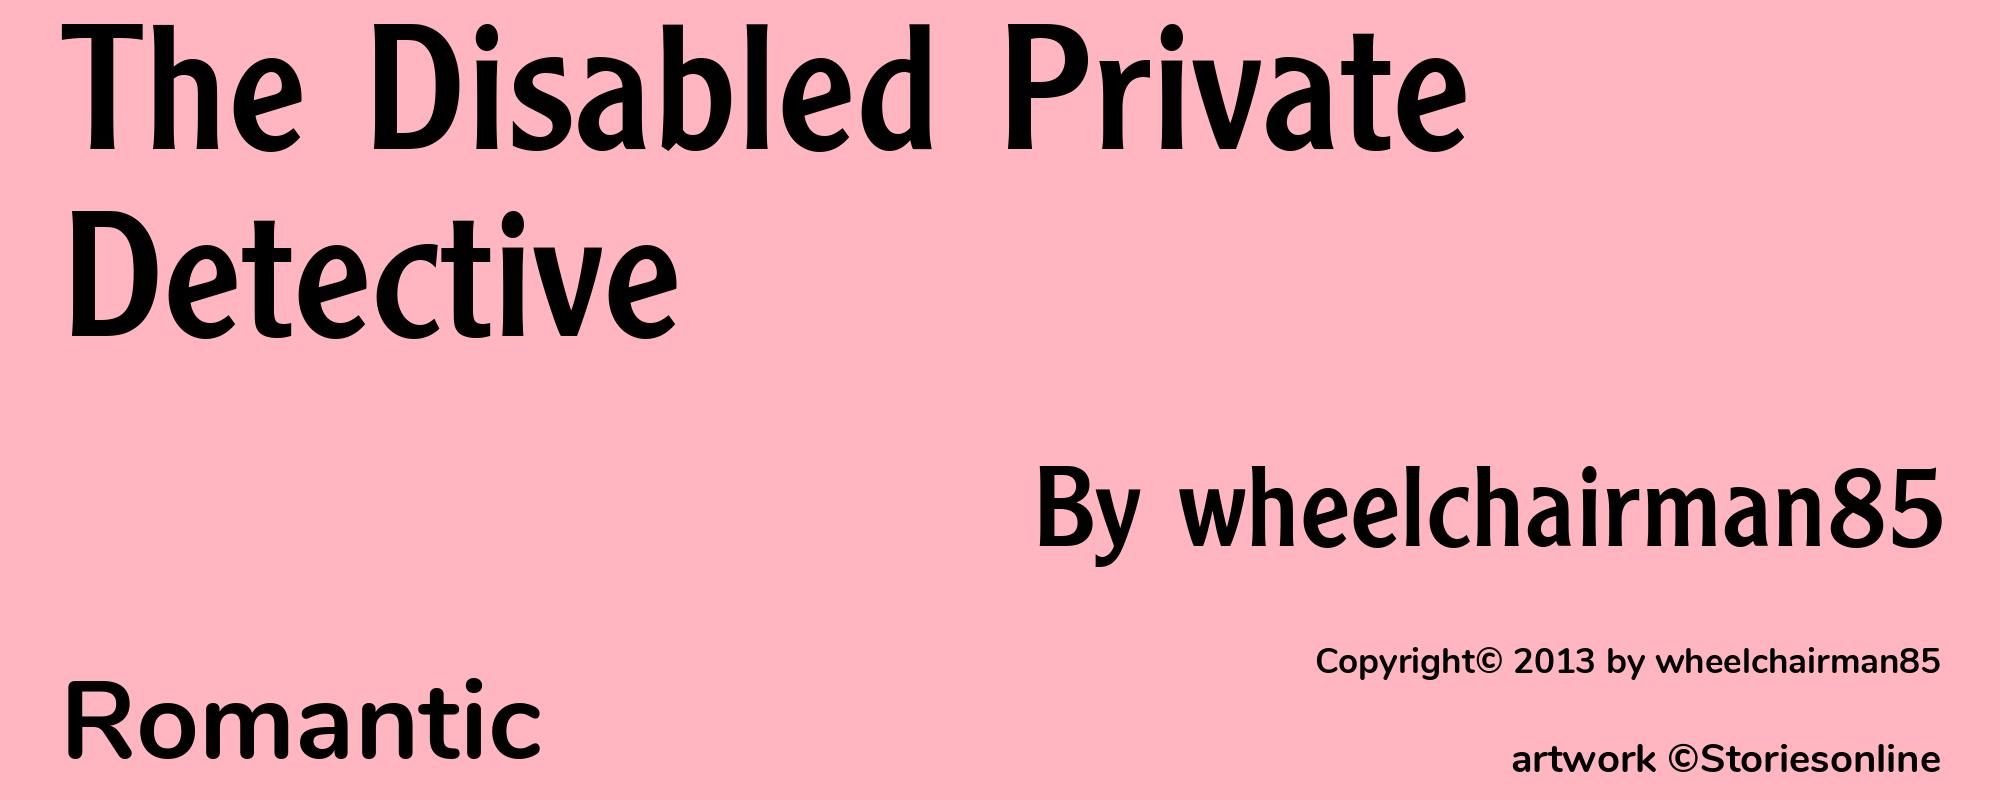 The Disabled Private Detective - Cover